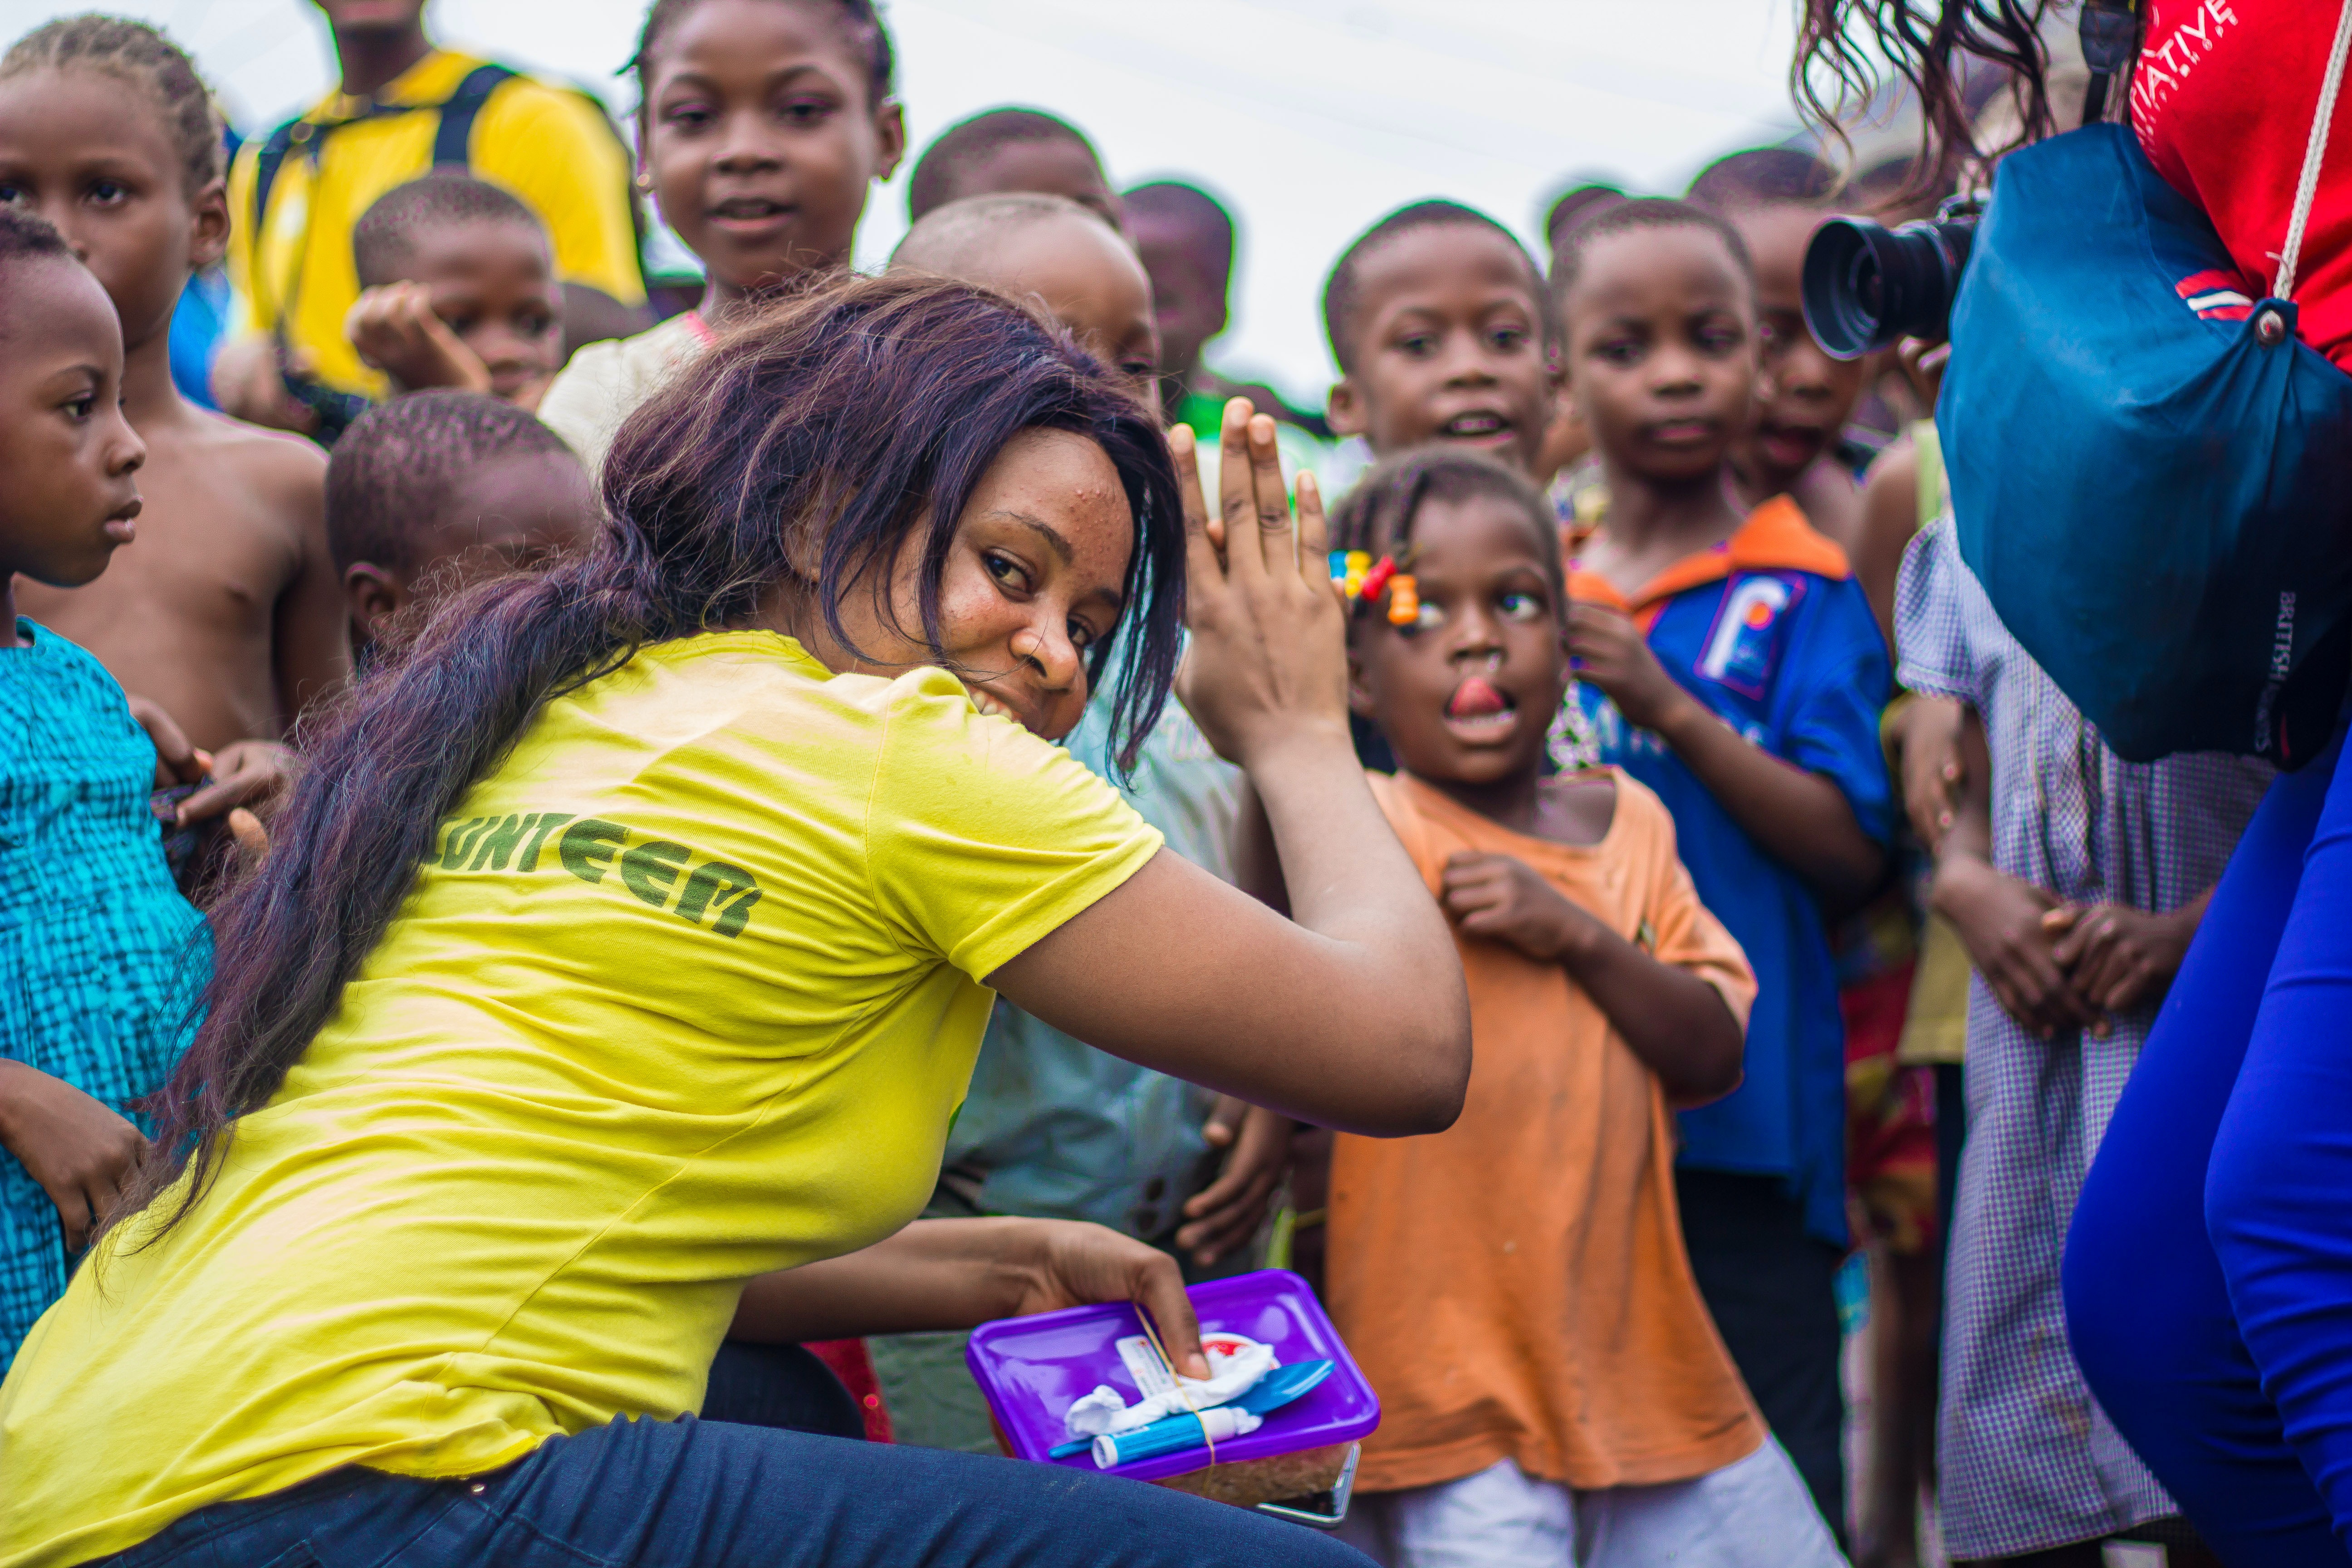 person in yellow volunteer shirt surrounded by children